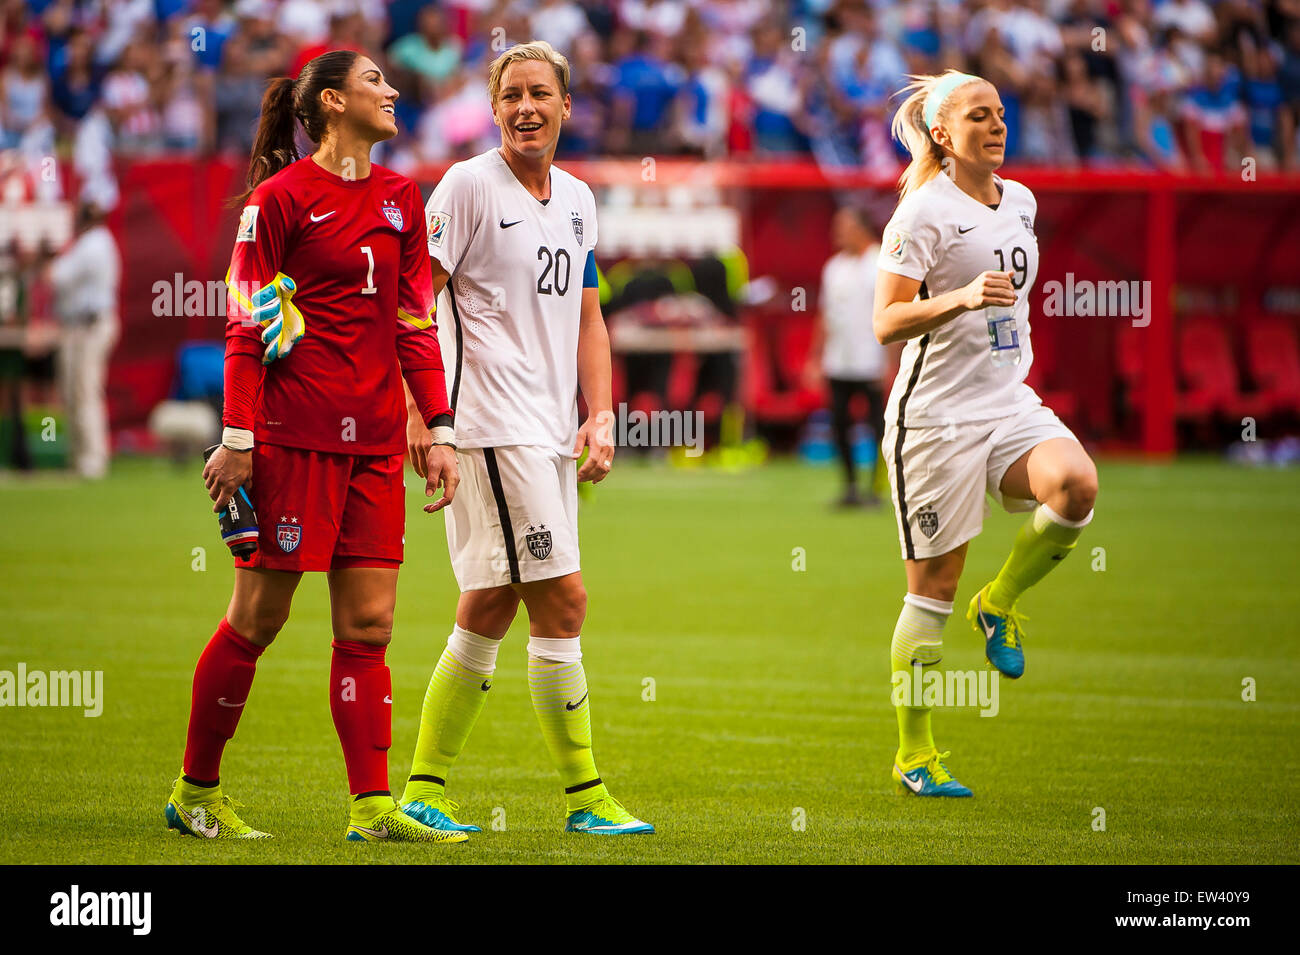 Vancouver, Canada. 16th June, 2015. United States goalkeeper Hope Solo (#1) and United States forward Abby Wambach (#20) following their opening round victory over Nigeria at the FIFA Women's World Cup Canada 2015 at BC Place Stadium. The United States won the match 1-0. Credit:  Matt Jacques/Alamy Live News Stock Photo